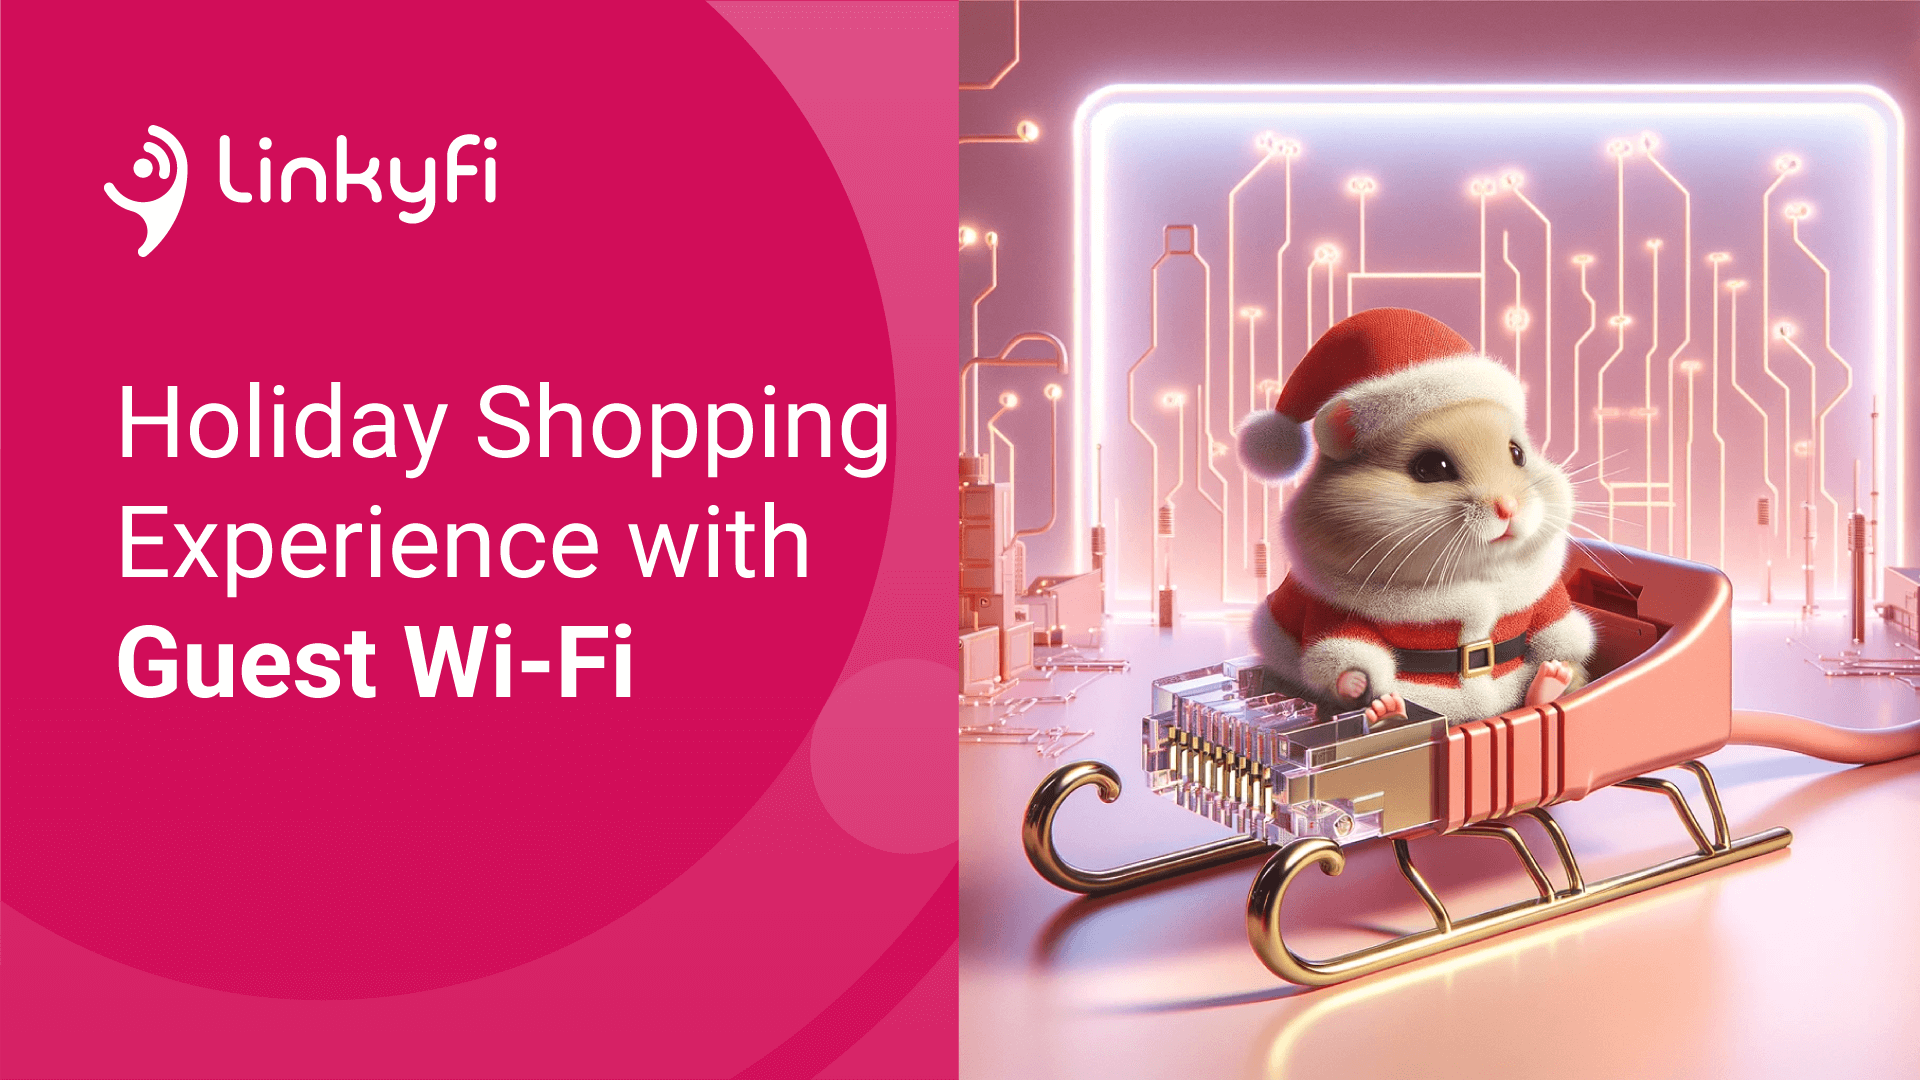 Wi-Fir Trees and Wireless Wishes: A Festive Take on WiFi